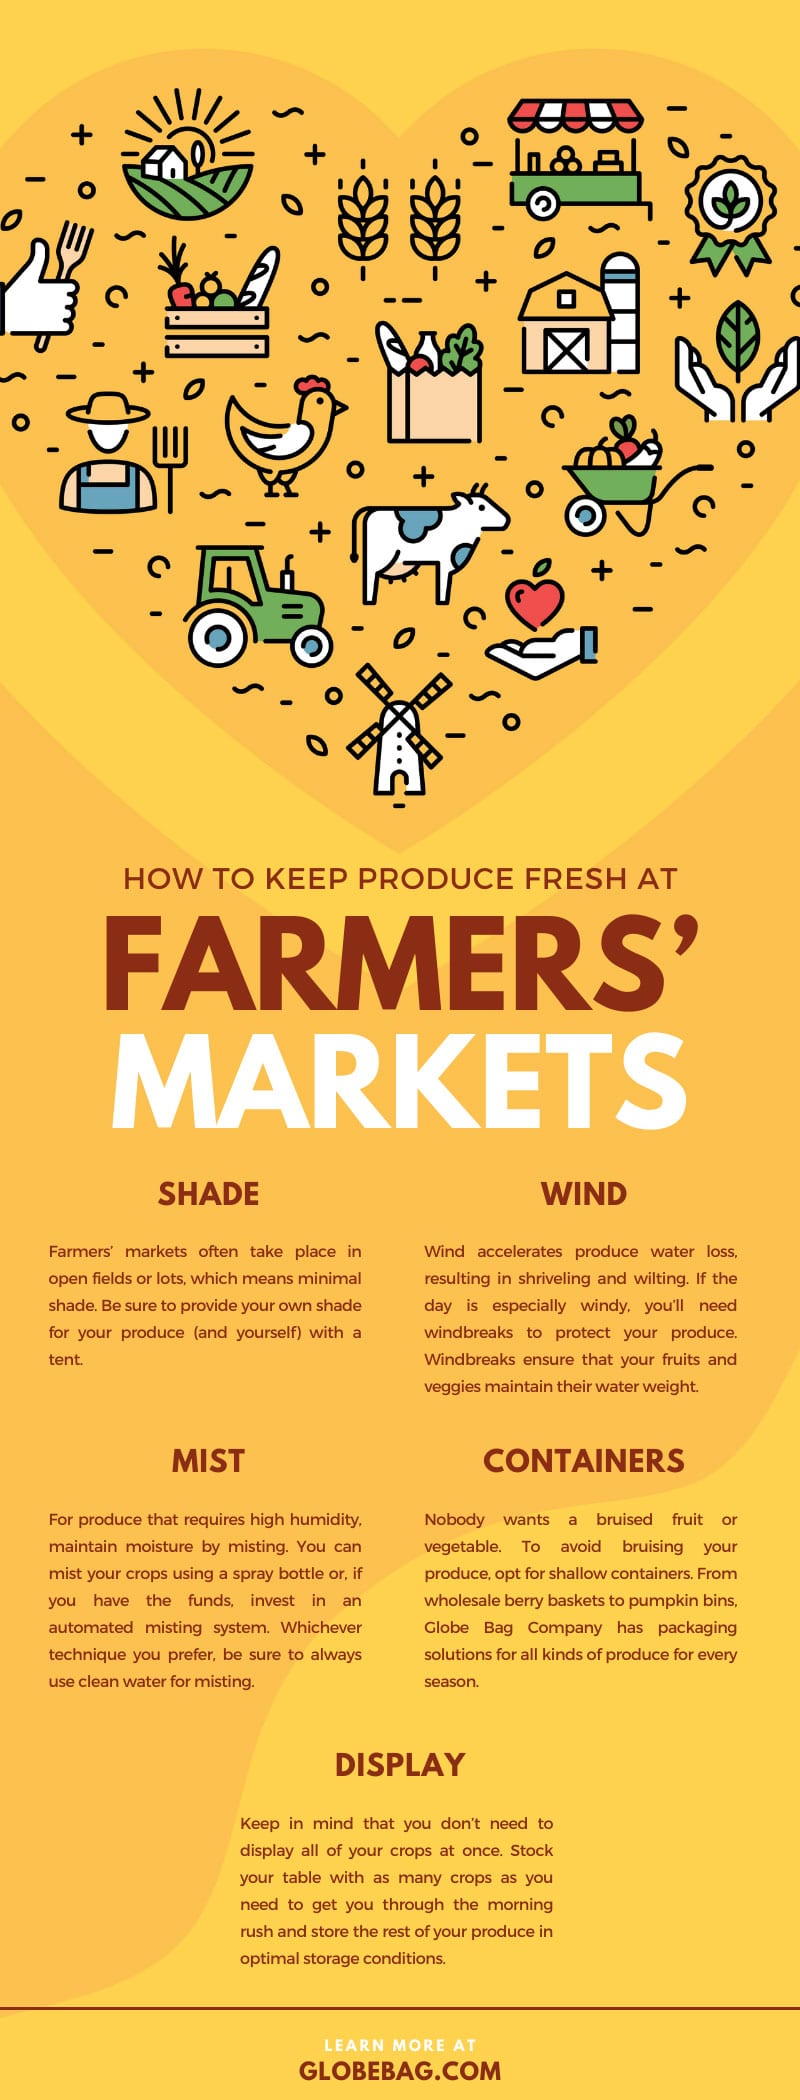 How To Keep Produce Fresh at Farmers’ Markets